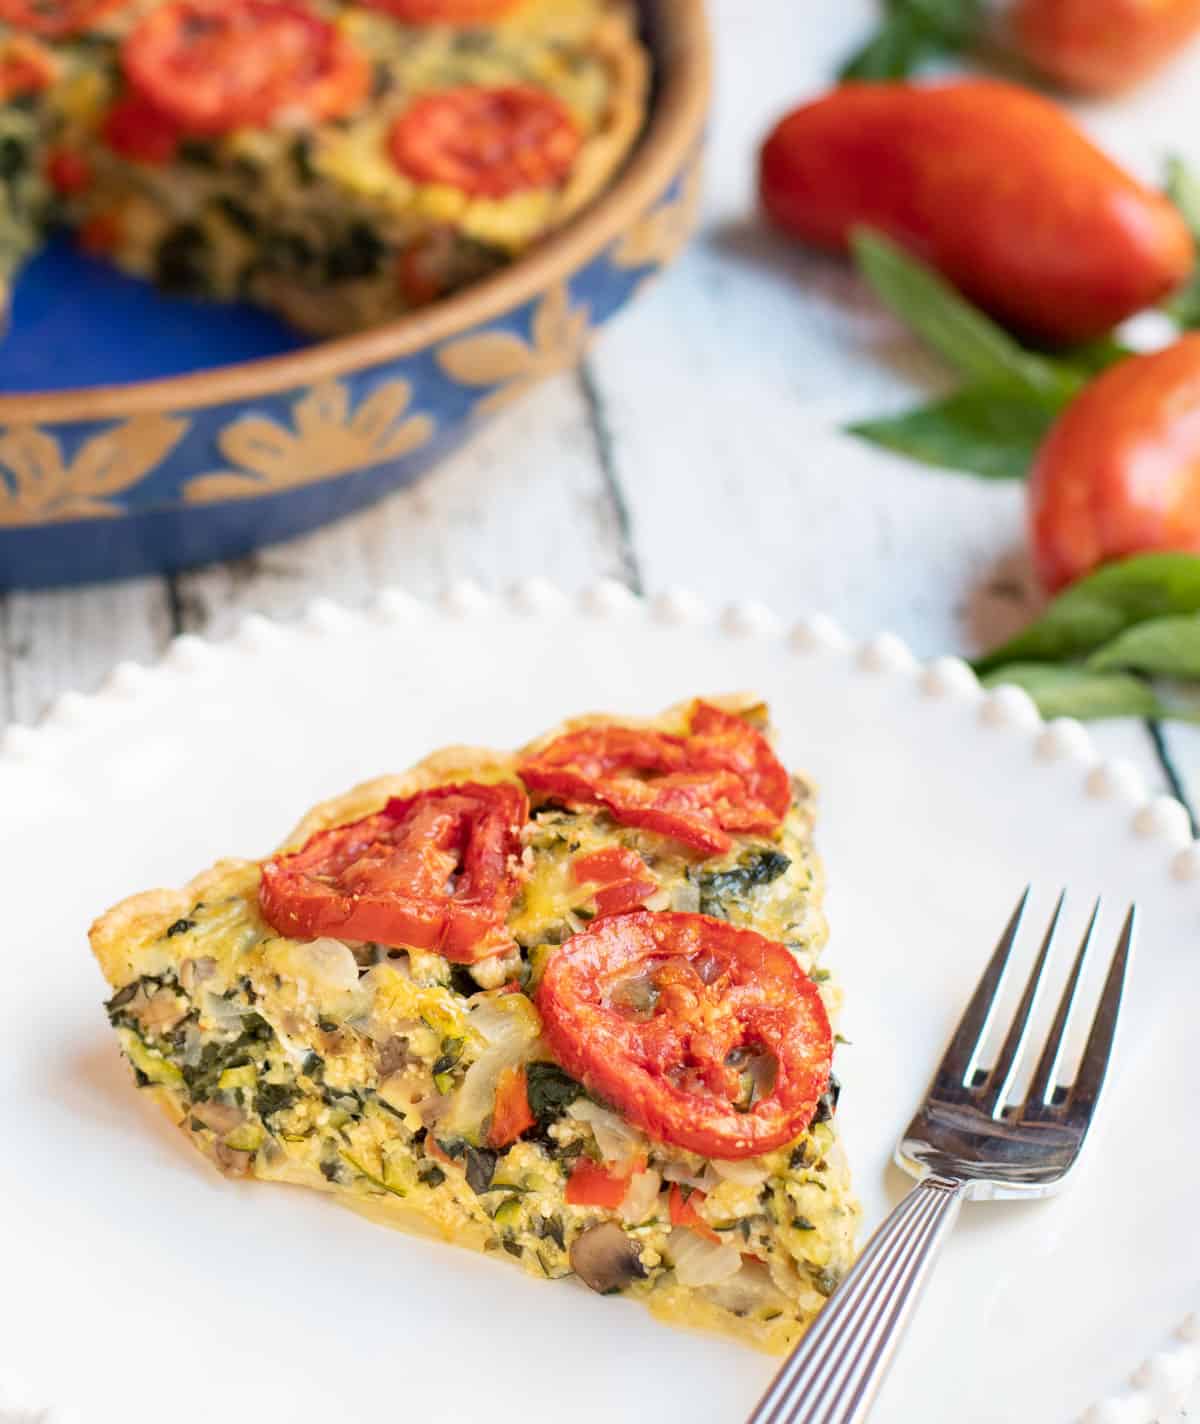 Slice of Mushroom, Spinach, Tomato and Zucchini Pie on a white plate